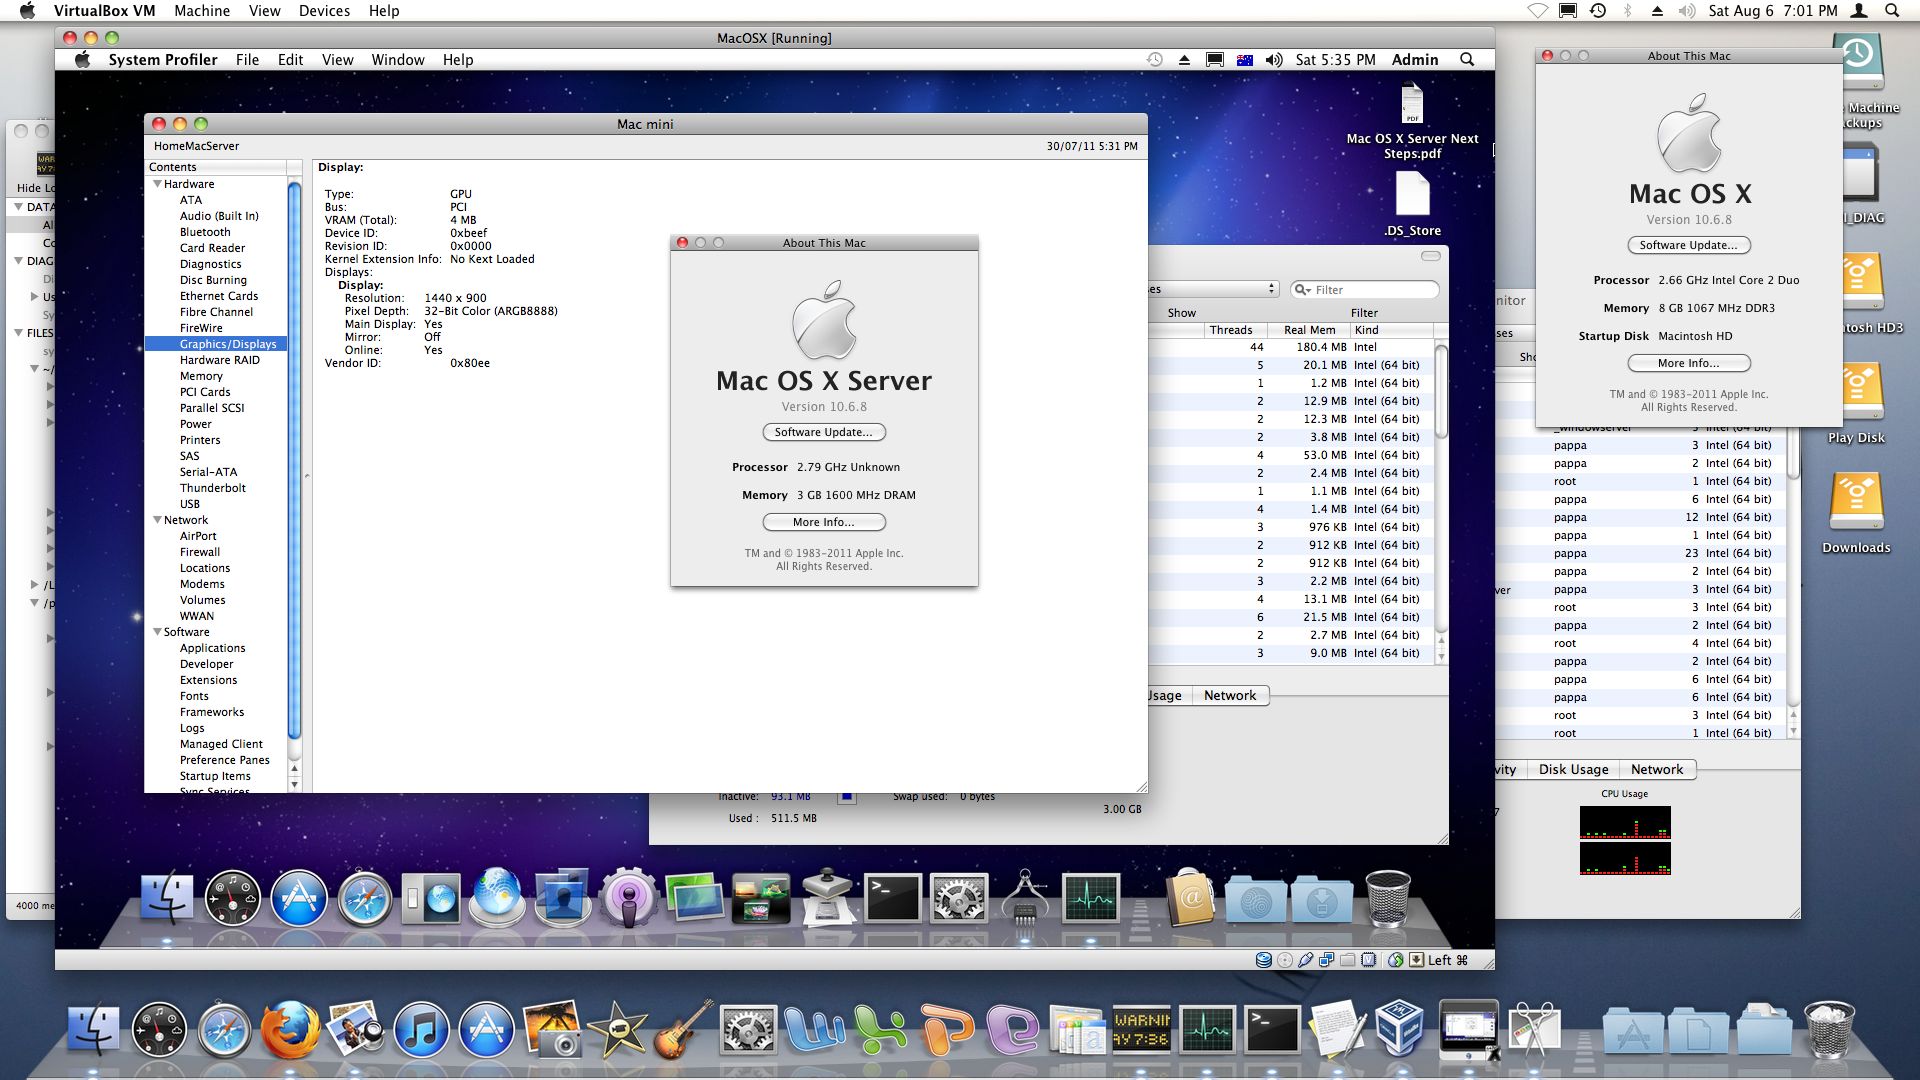 drivers for mac os